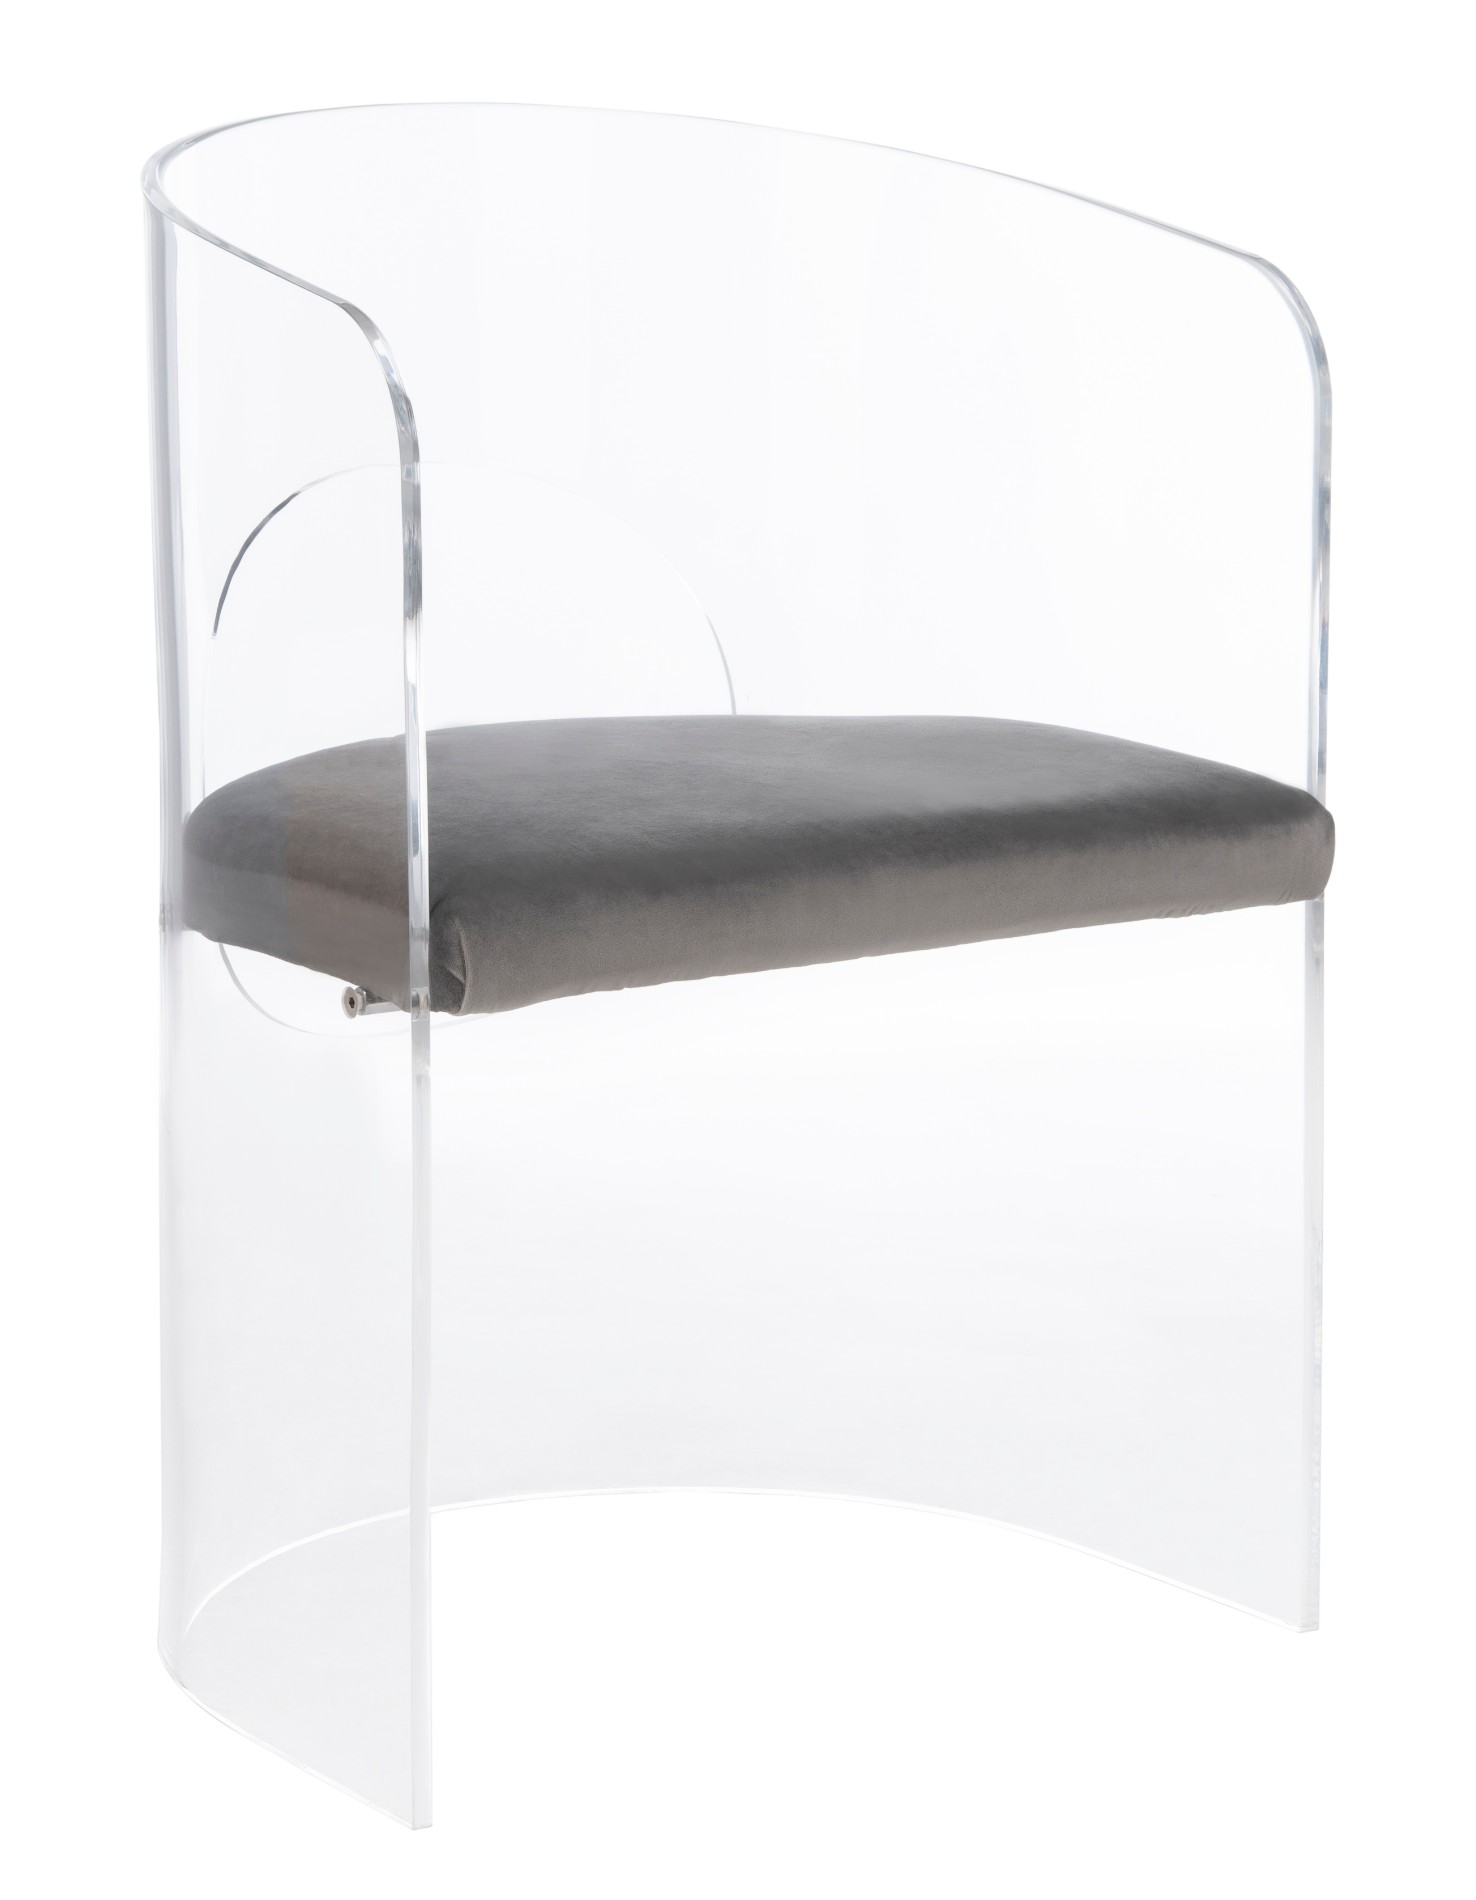 Clear Acrylic Round Chair With Pillow Manufacturers, Clear Acrylic Round Chair With Pillow Factory, Supply Clear Acrylic Round Chair With Pillow